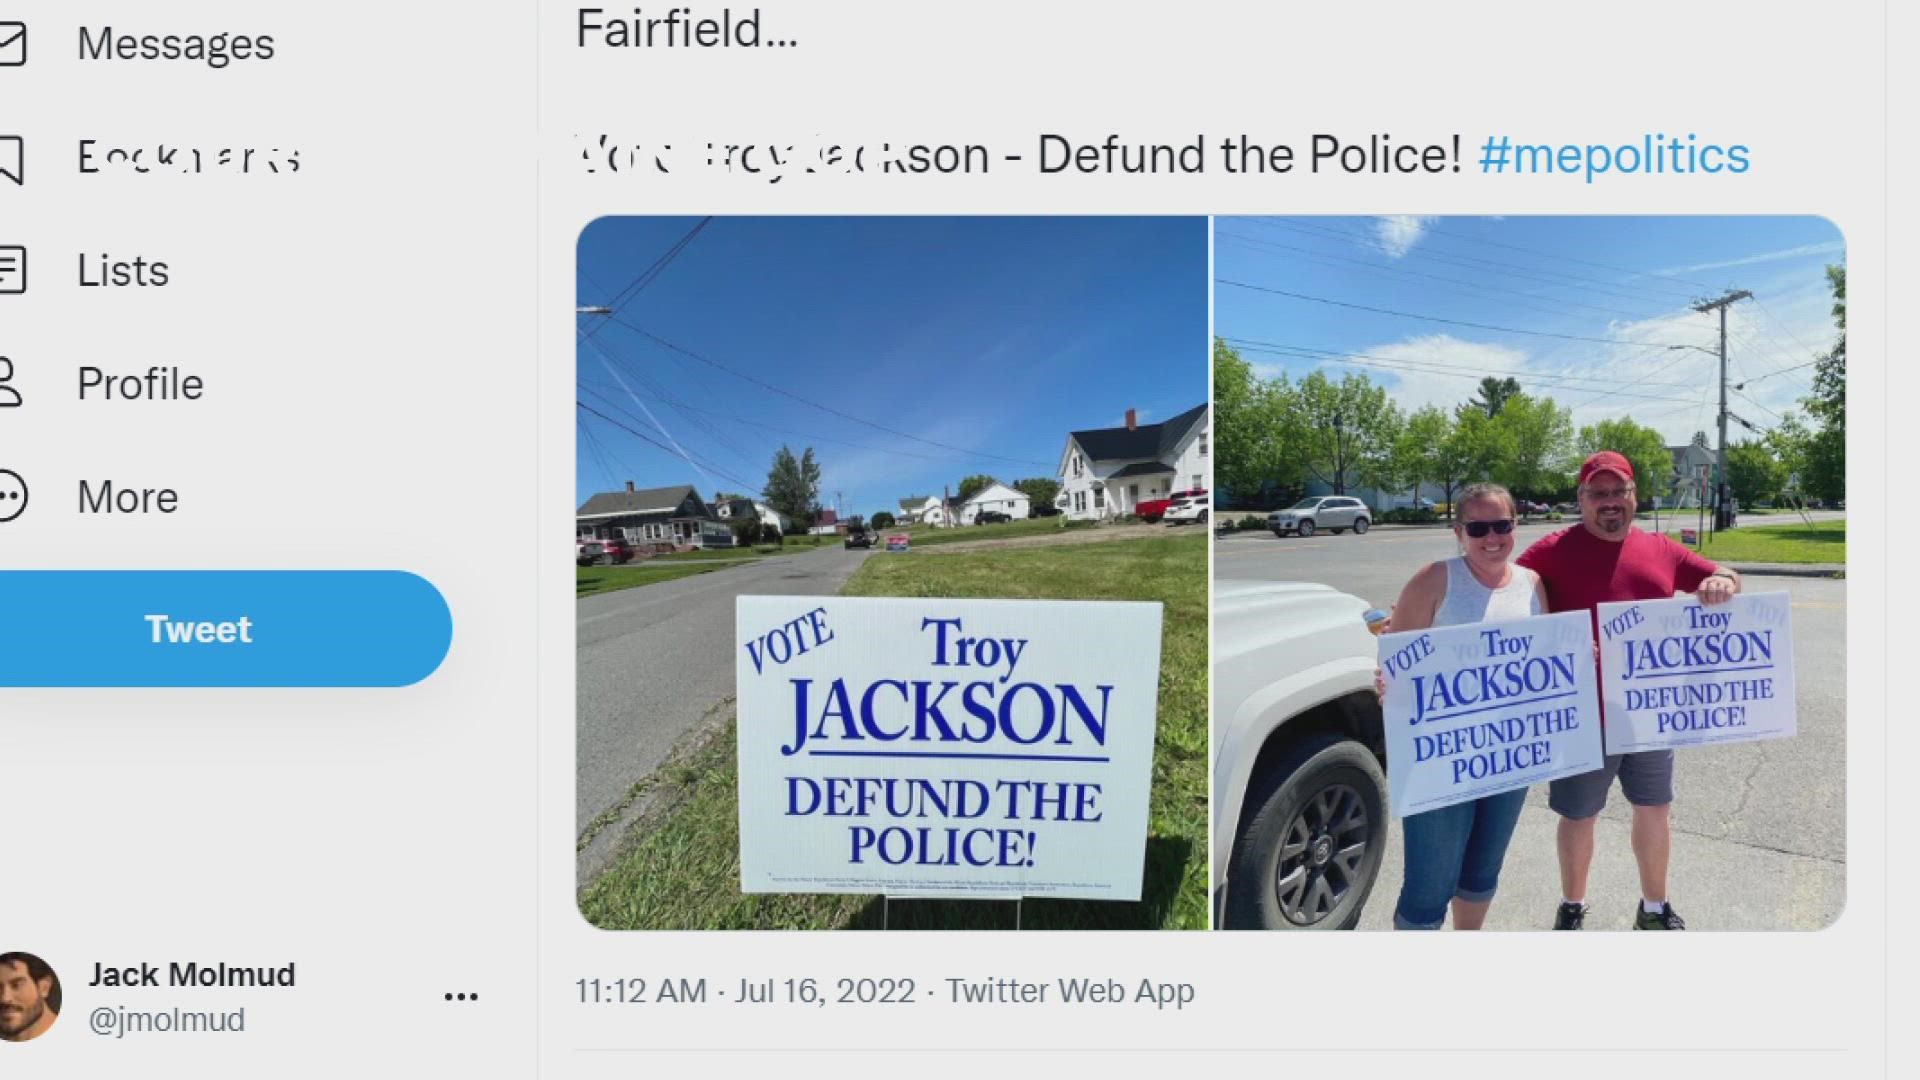 The ads say 'Vote Troy Jackson, Defund the Police," but Senate President Jackson says his political philosophy is the opposite.